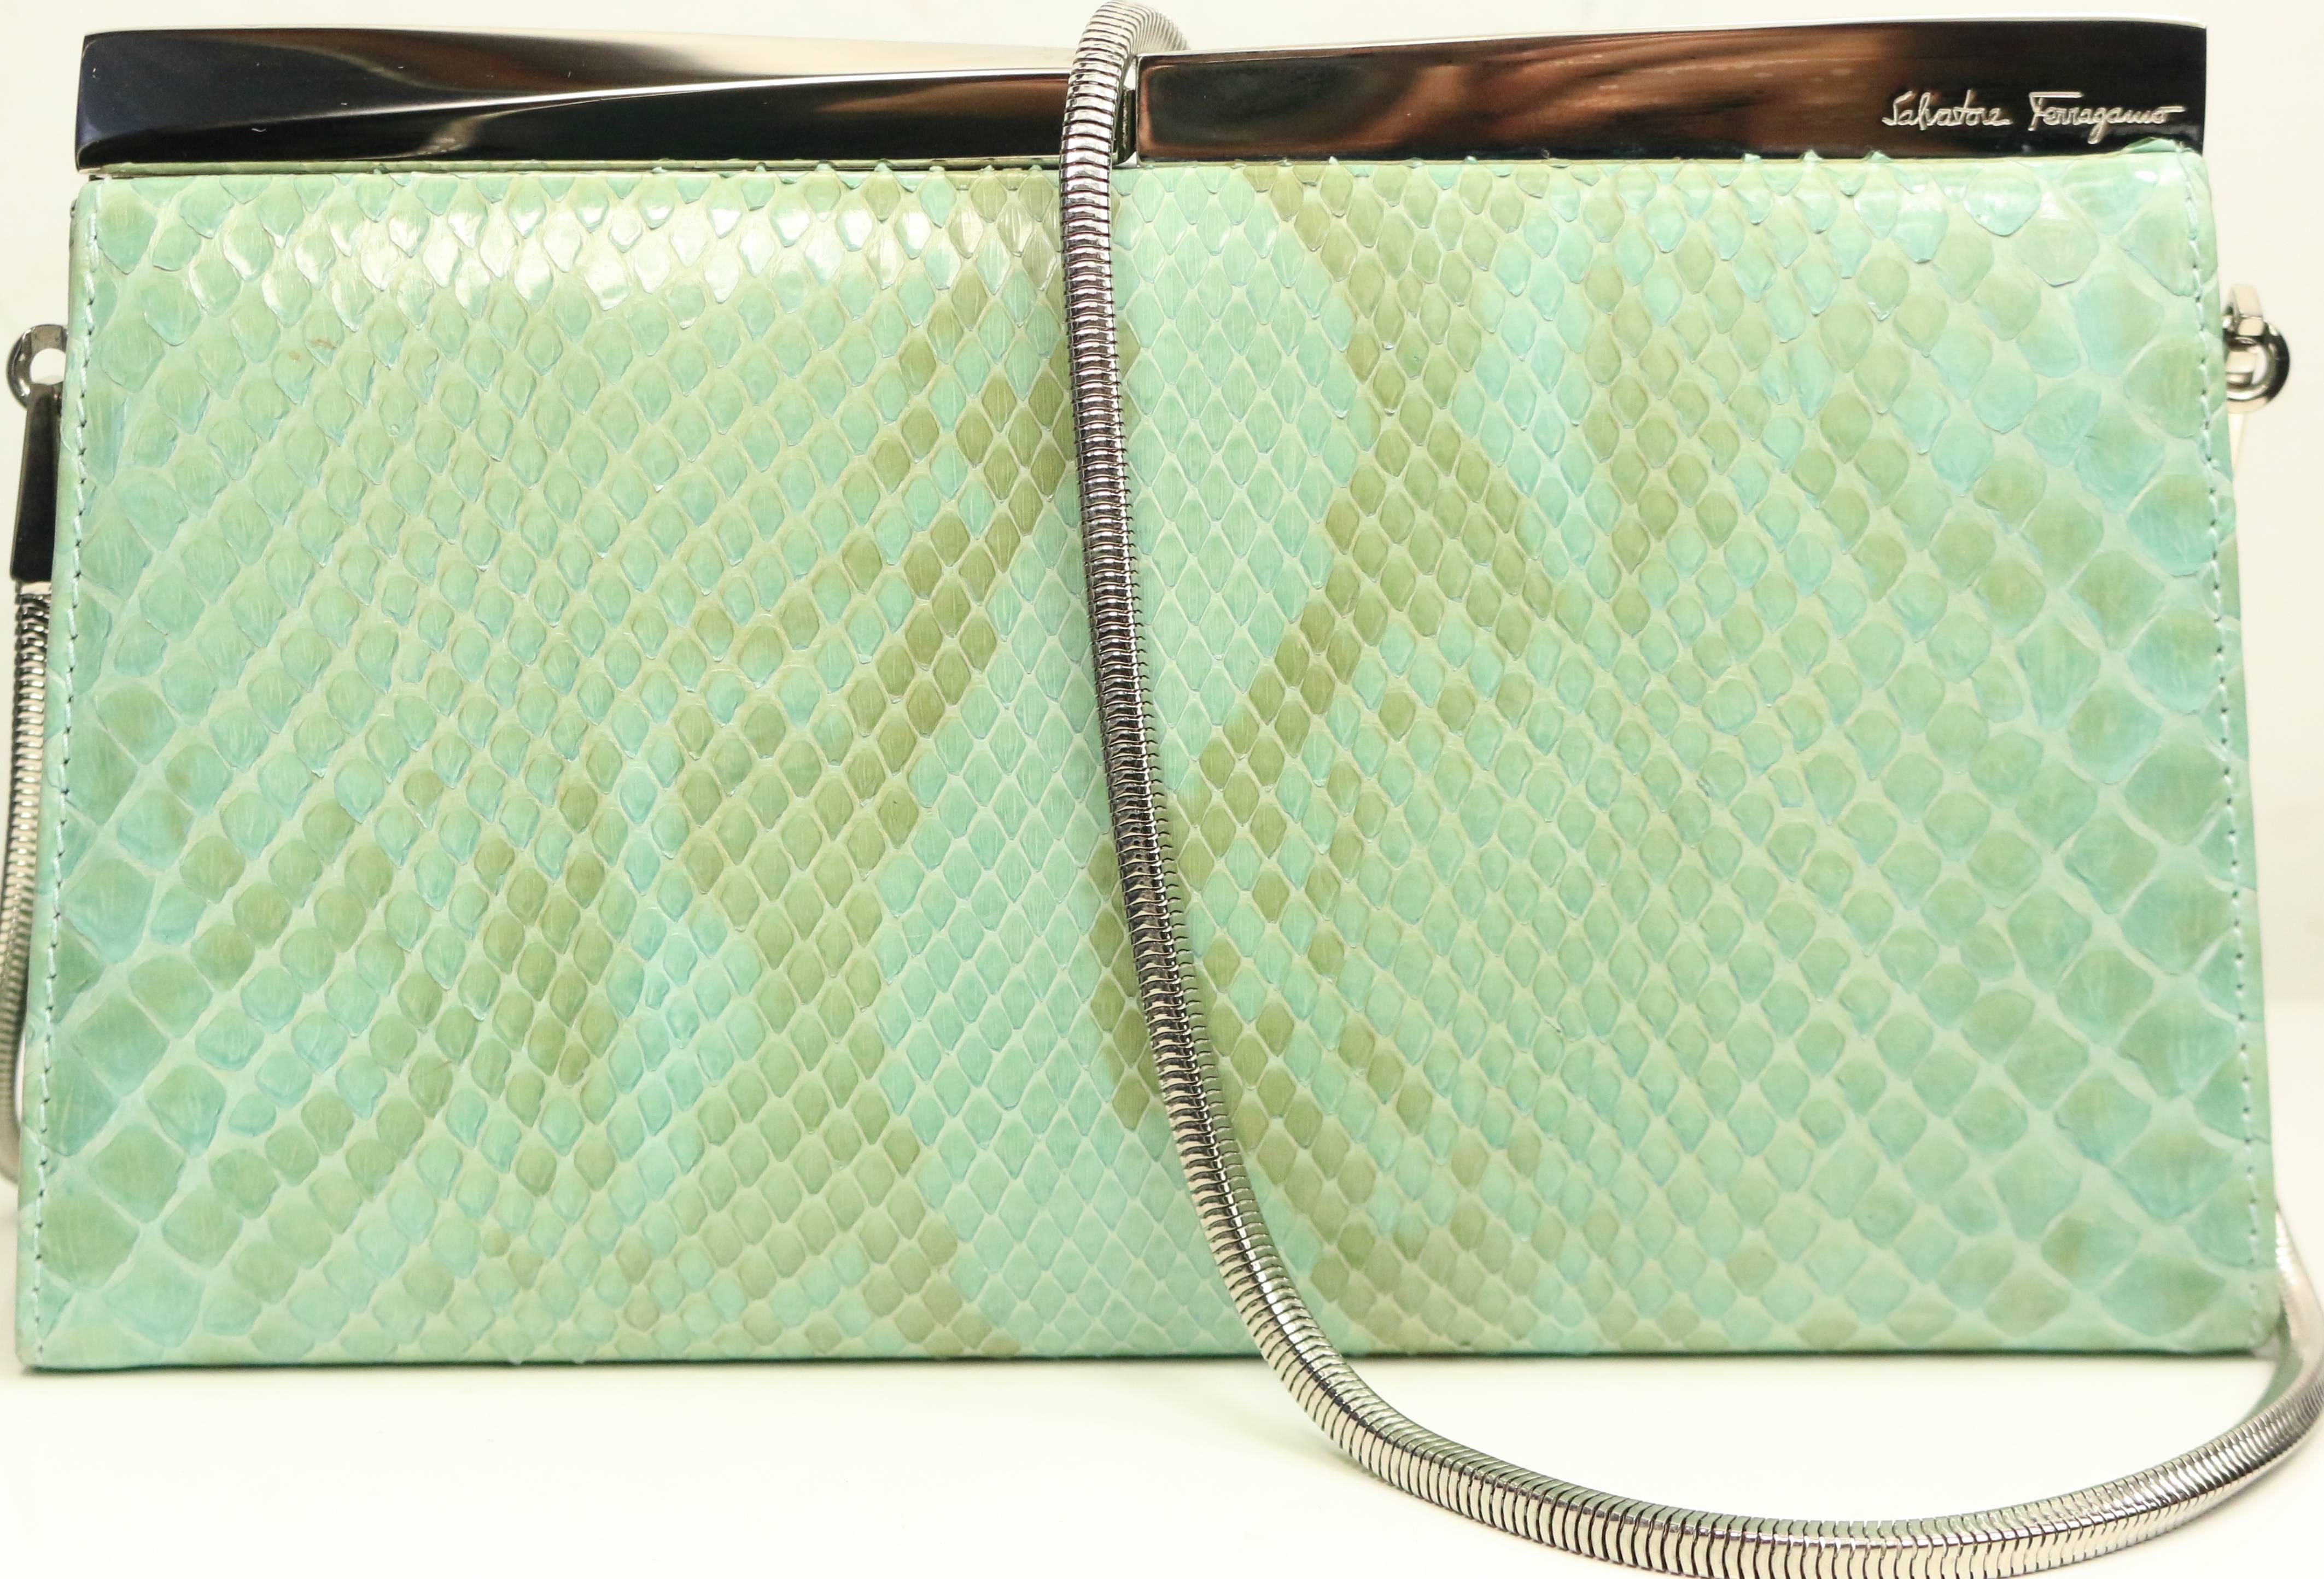 - Vintage 90s Salvatore Ferragamo green python clutch with silver toned detachable shoulder strap. Featuring an interior zipper pocket. This erotic python clutch is suitable for causal daily use or an evening night out.

- Made in Italy. 

- Length: